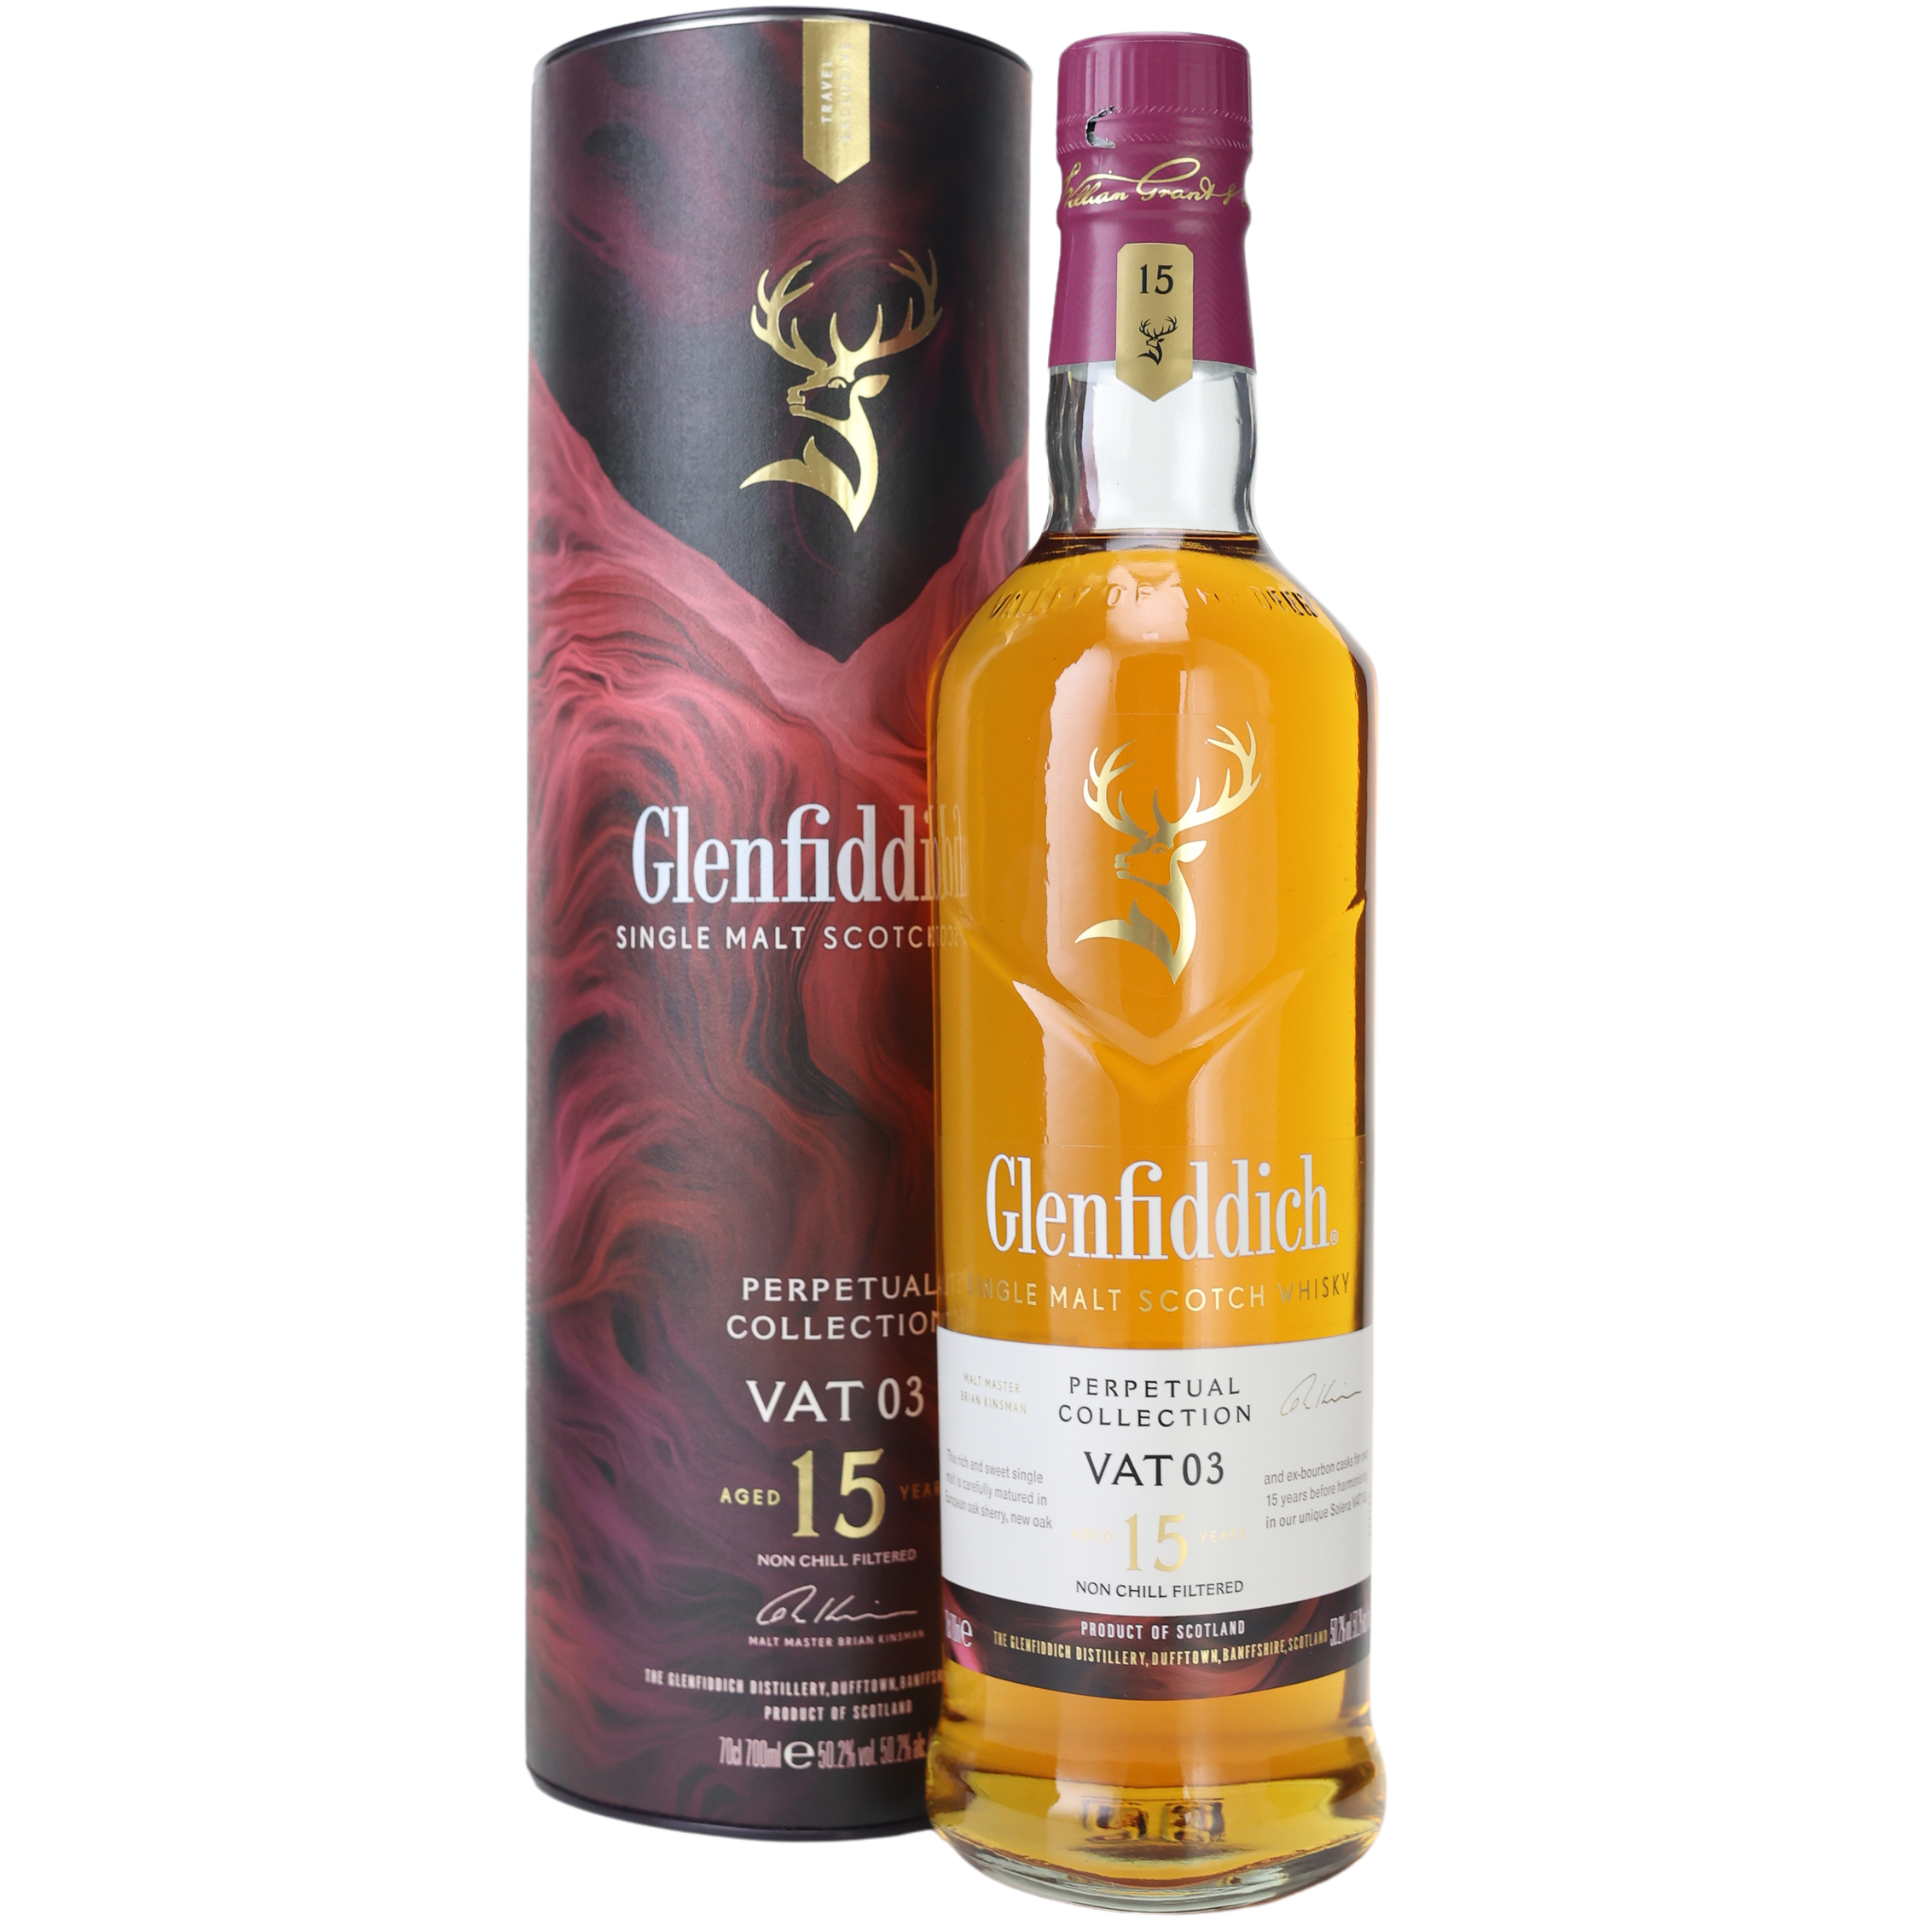 Glenfiddich VAT 03 Perpetual Collection 15 Jahre Whisky 50,2% 0,7l